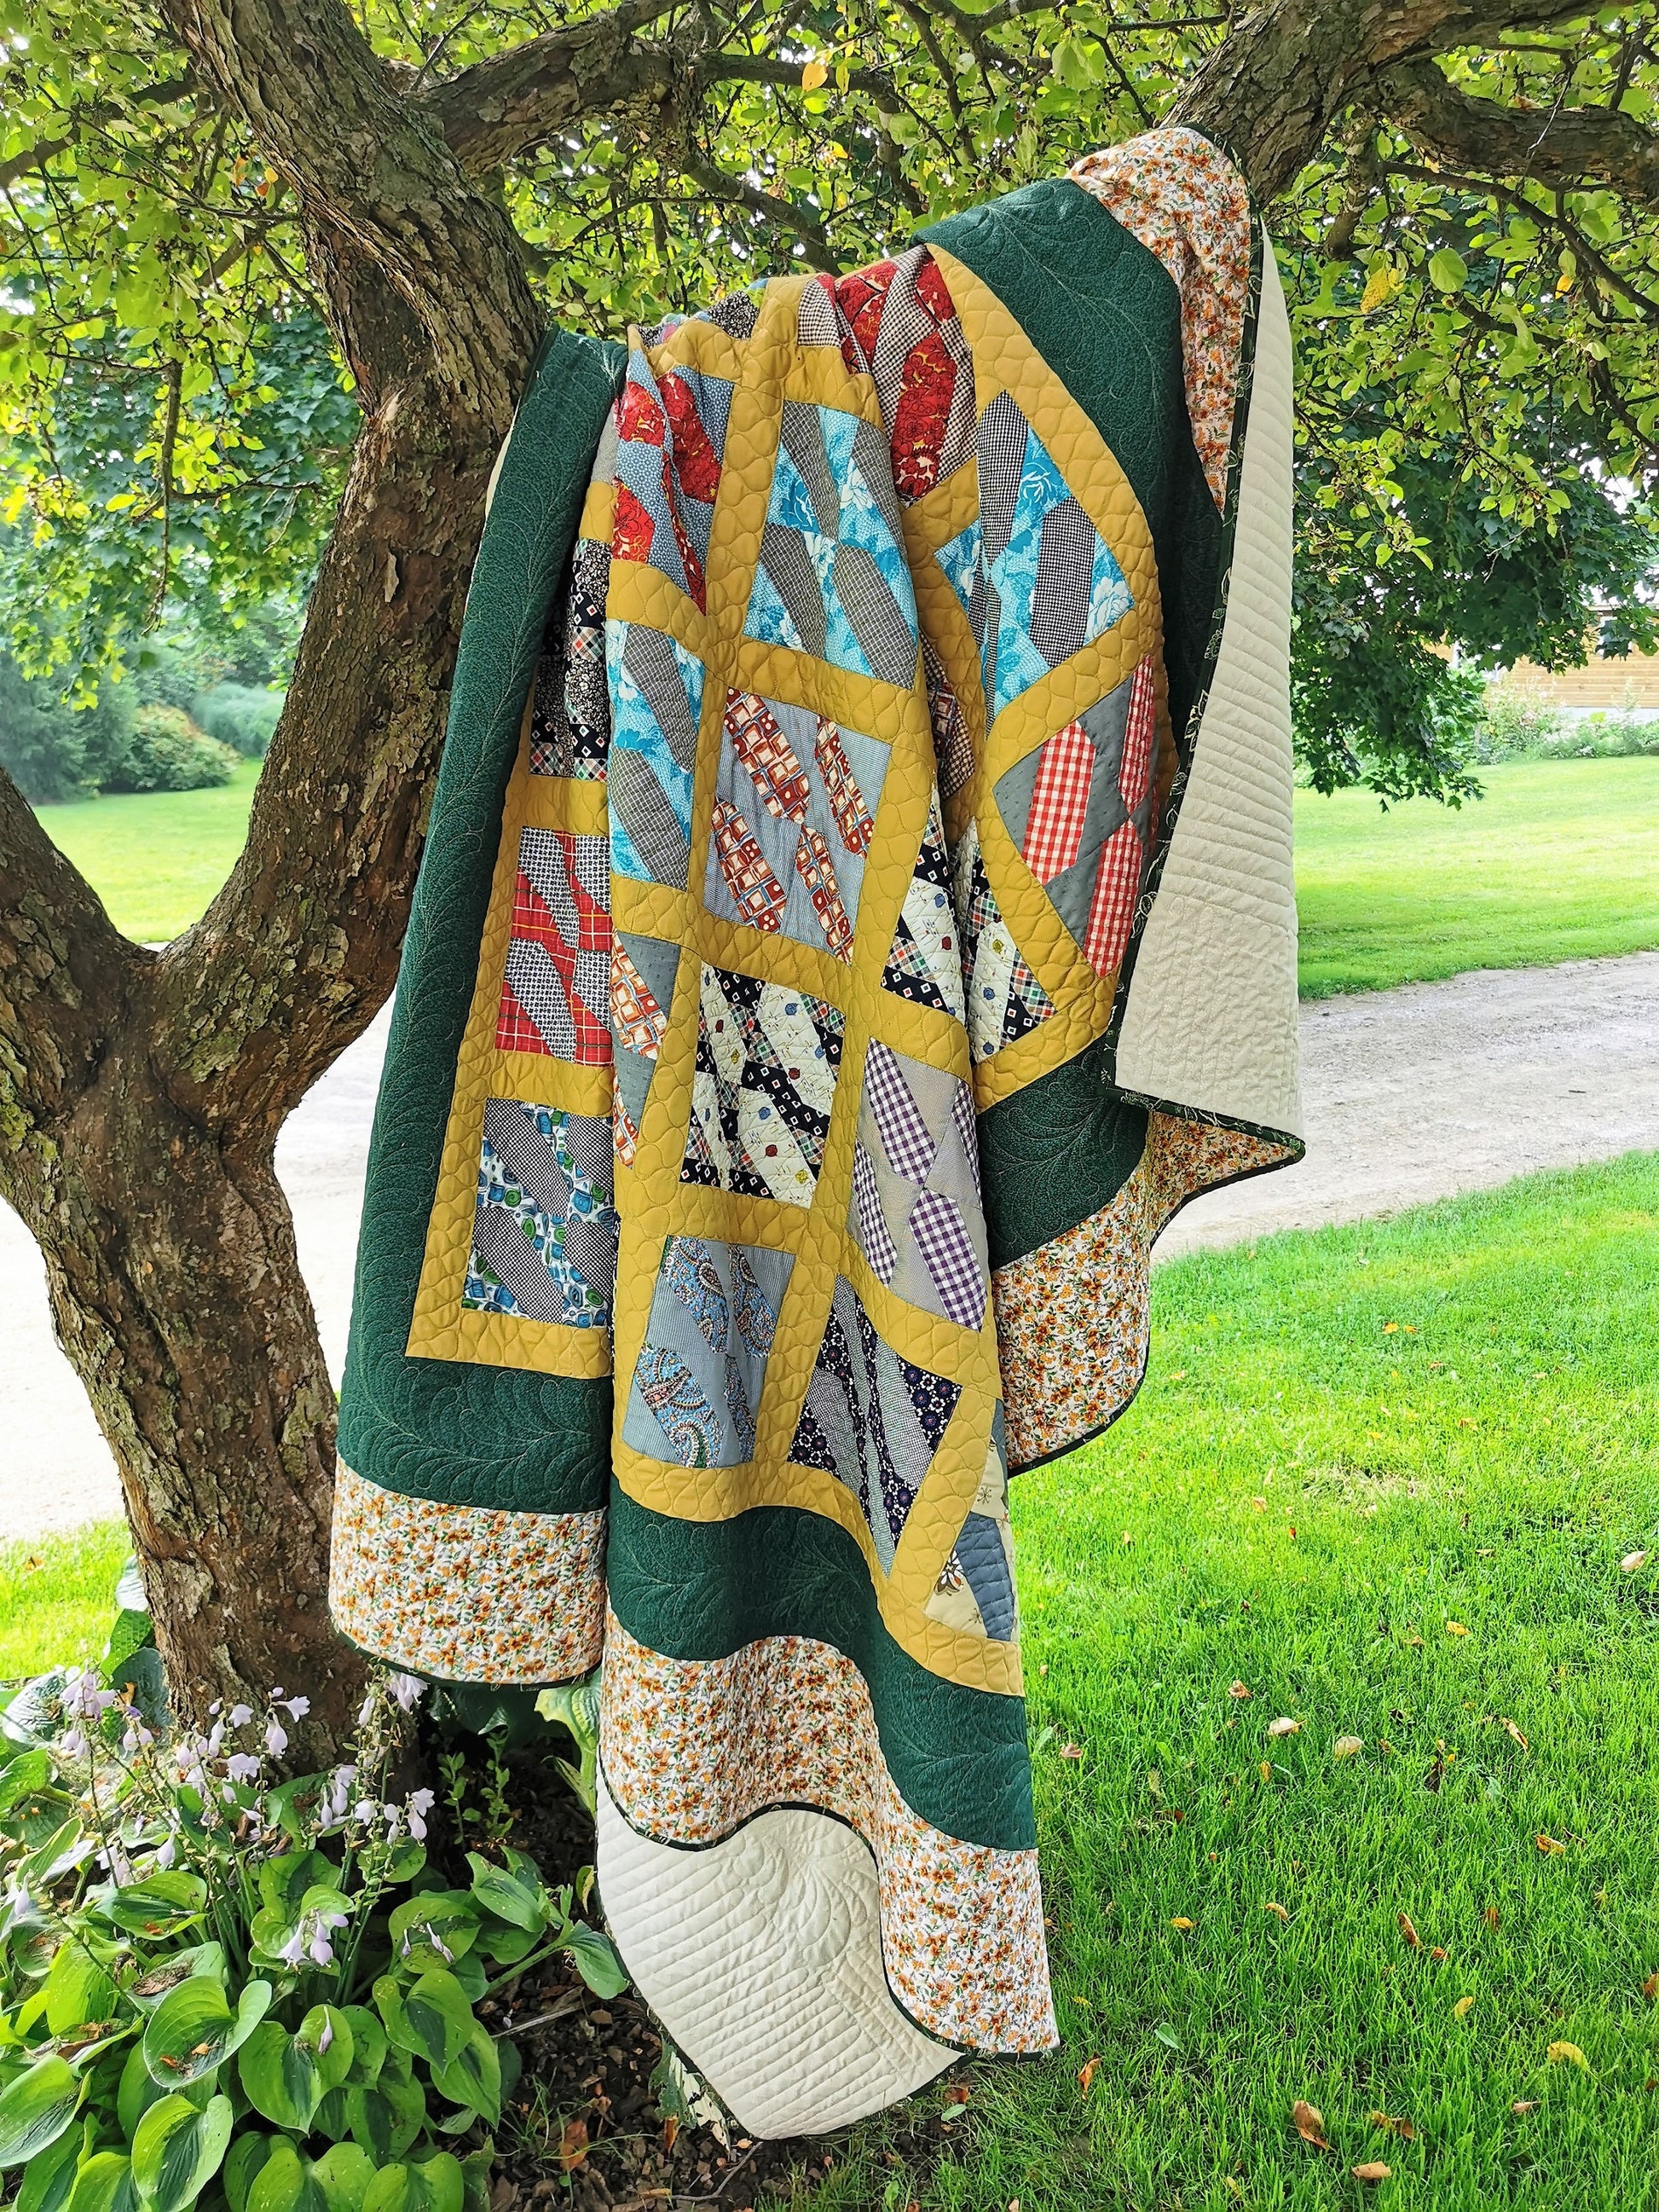 This large queen vintage bed quilt it shown in outdoor light, draped over the branch of a crab apple tree.  The middle of the quilt top has the vintage patchwork blocks set in a mustard yellow grid pattern. The interior grid is surrounded by a dark green border then a beige floral border around the outside